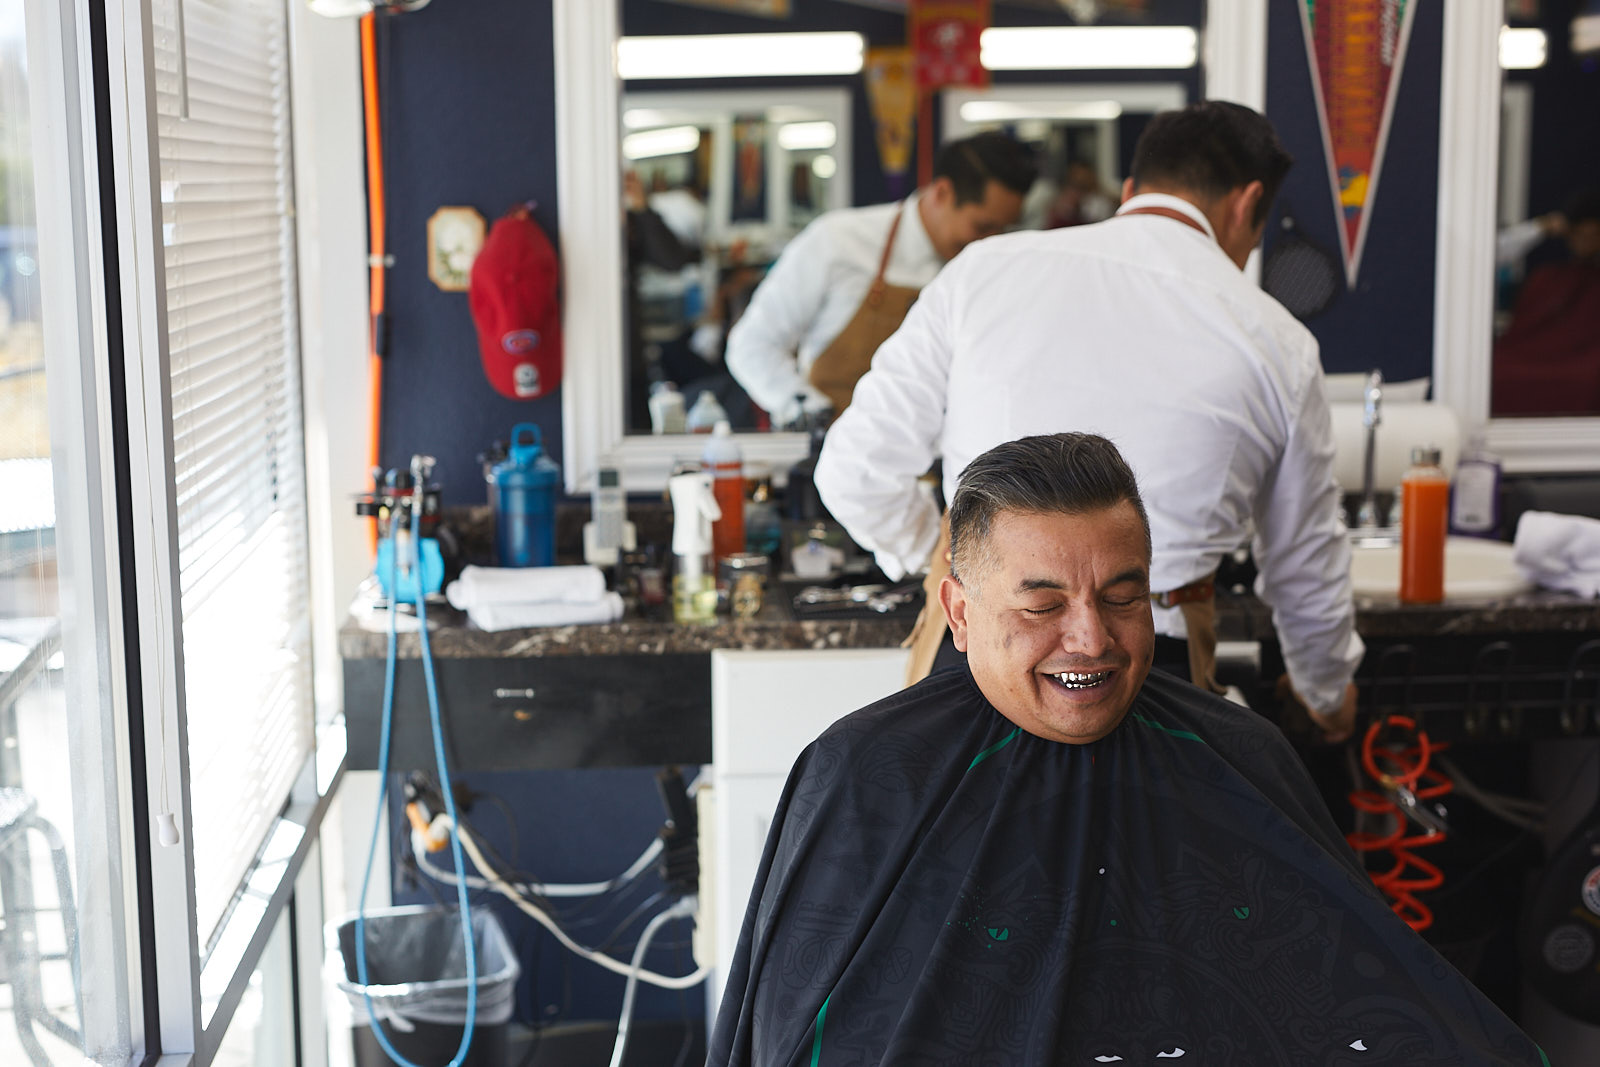 Lifestyle image of a man with gold teeth smiling during a hair cut at a barber shop - John Robson Photography